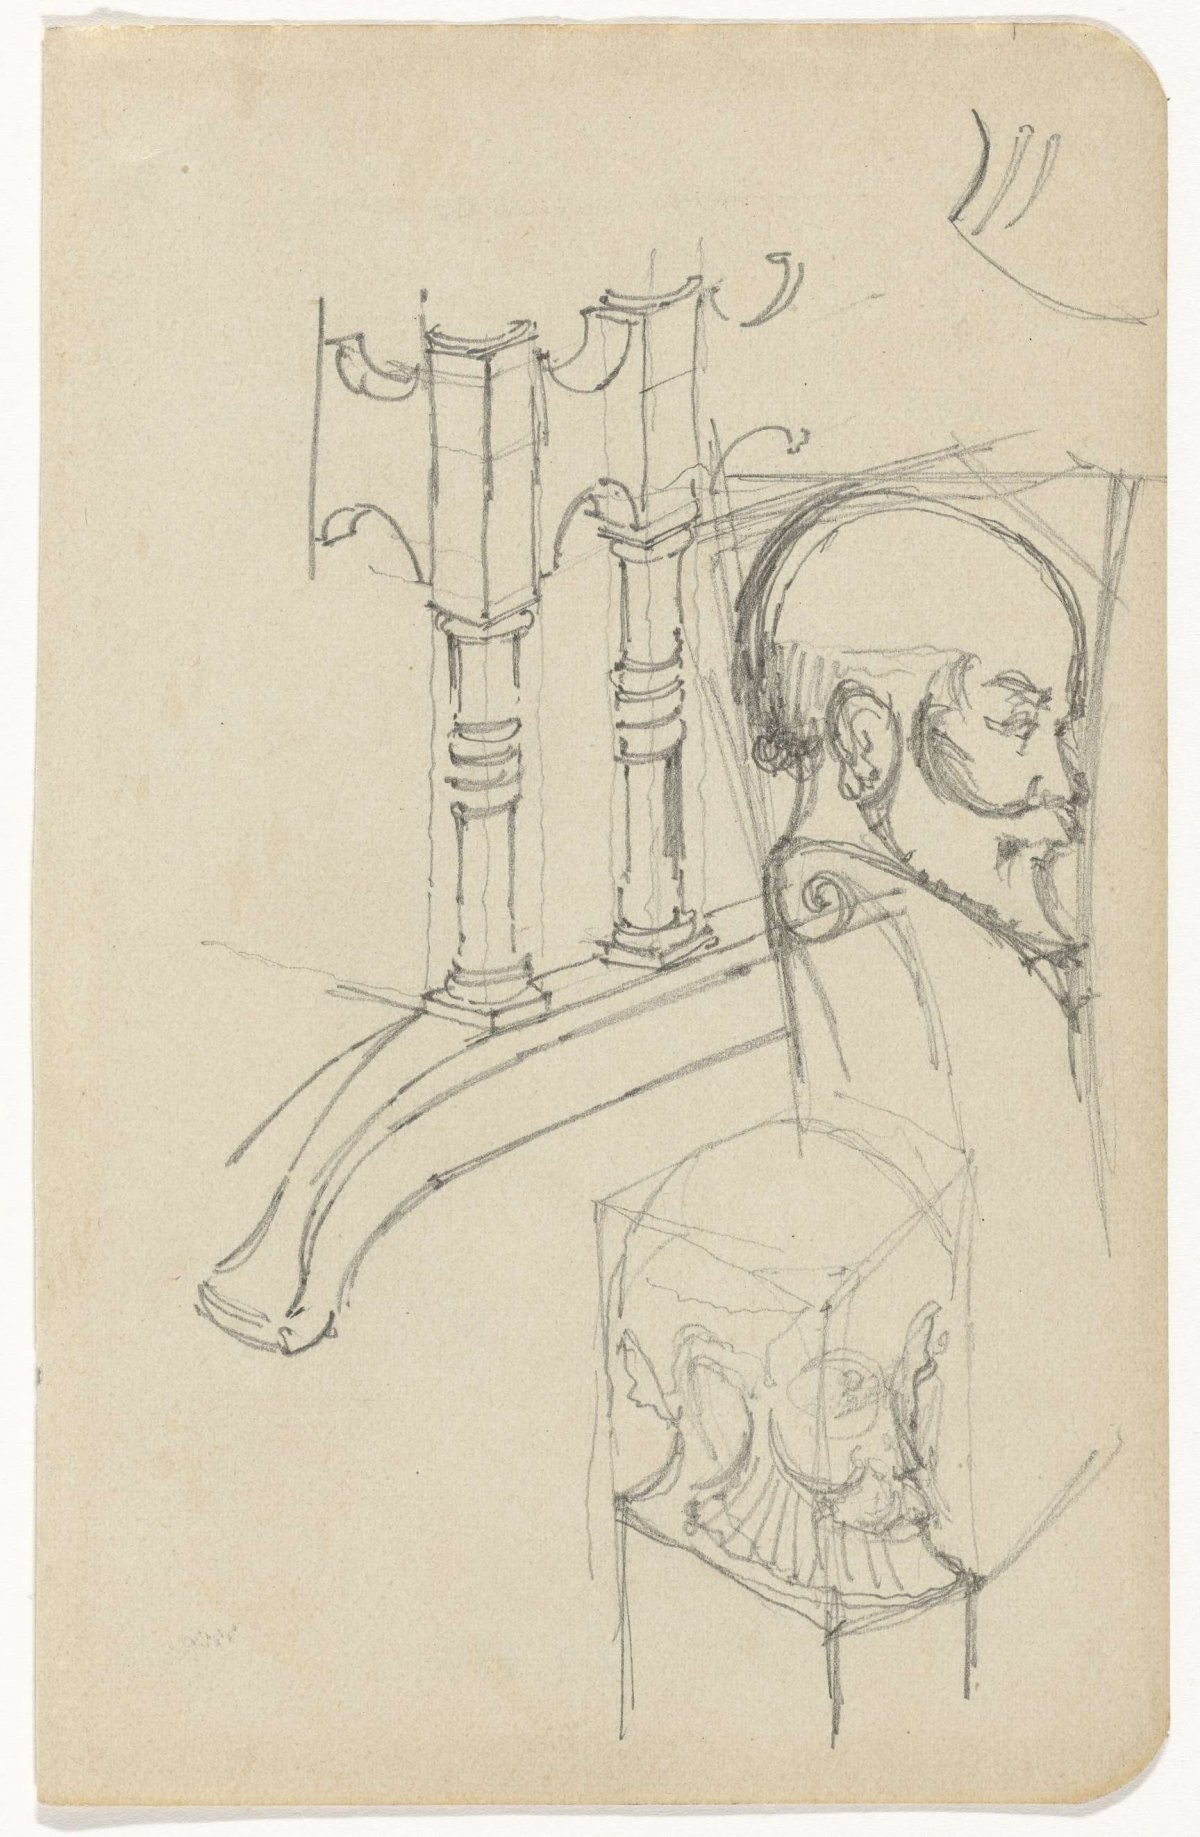 Sketch of the base of a table, and a carved handrail, Gerrit Willem Dijsselhof, 1876 - 1924